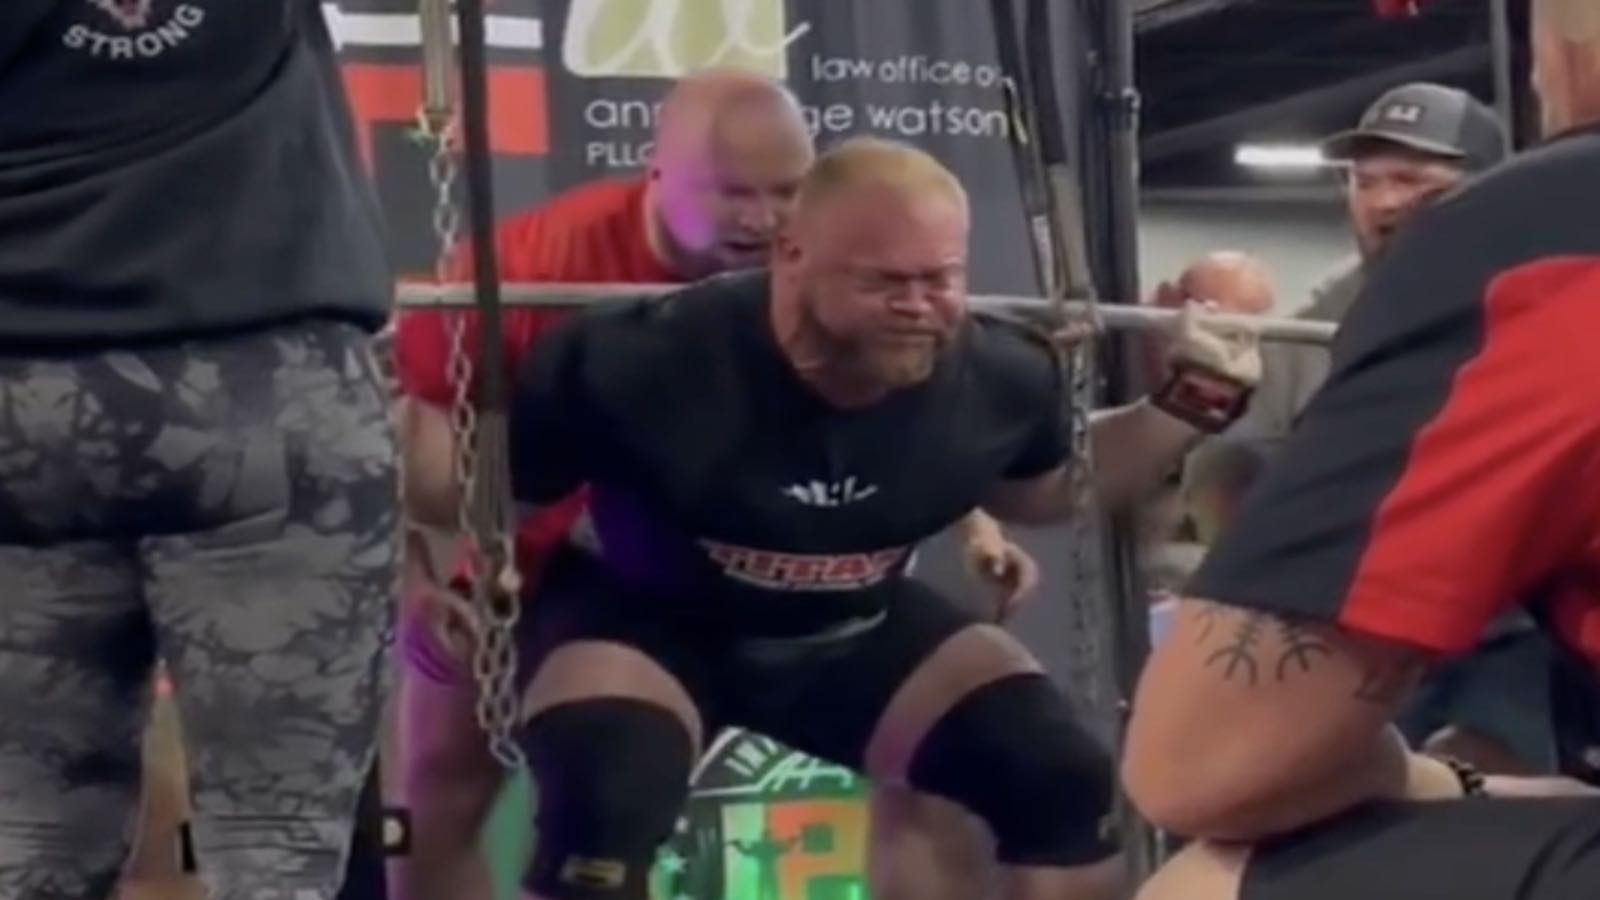 phillip-herndon-(125kg)-squats-411-kilograms-(906.1-pounds)-for-raw-all-time-world-record-–-breaking-muscle